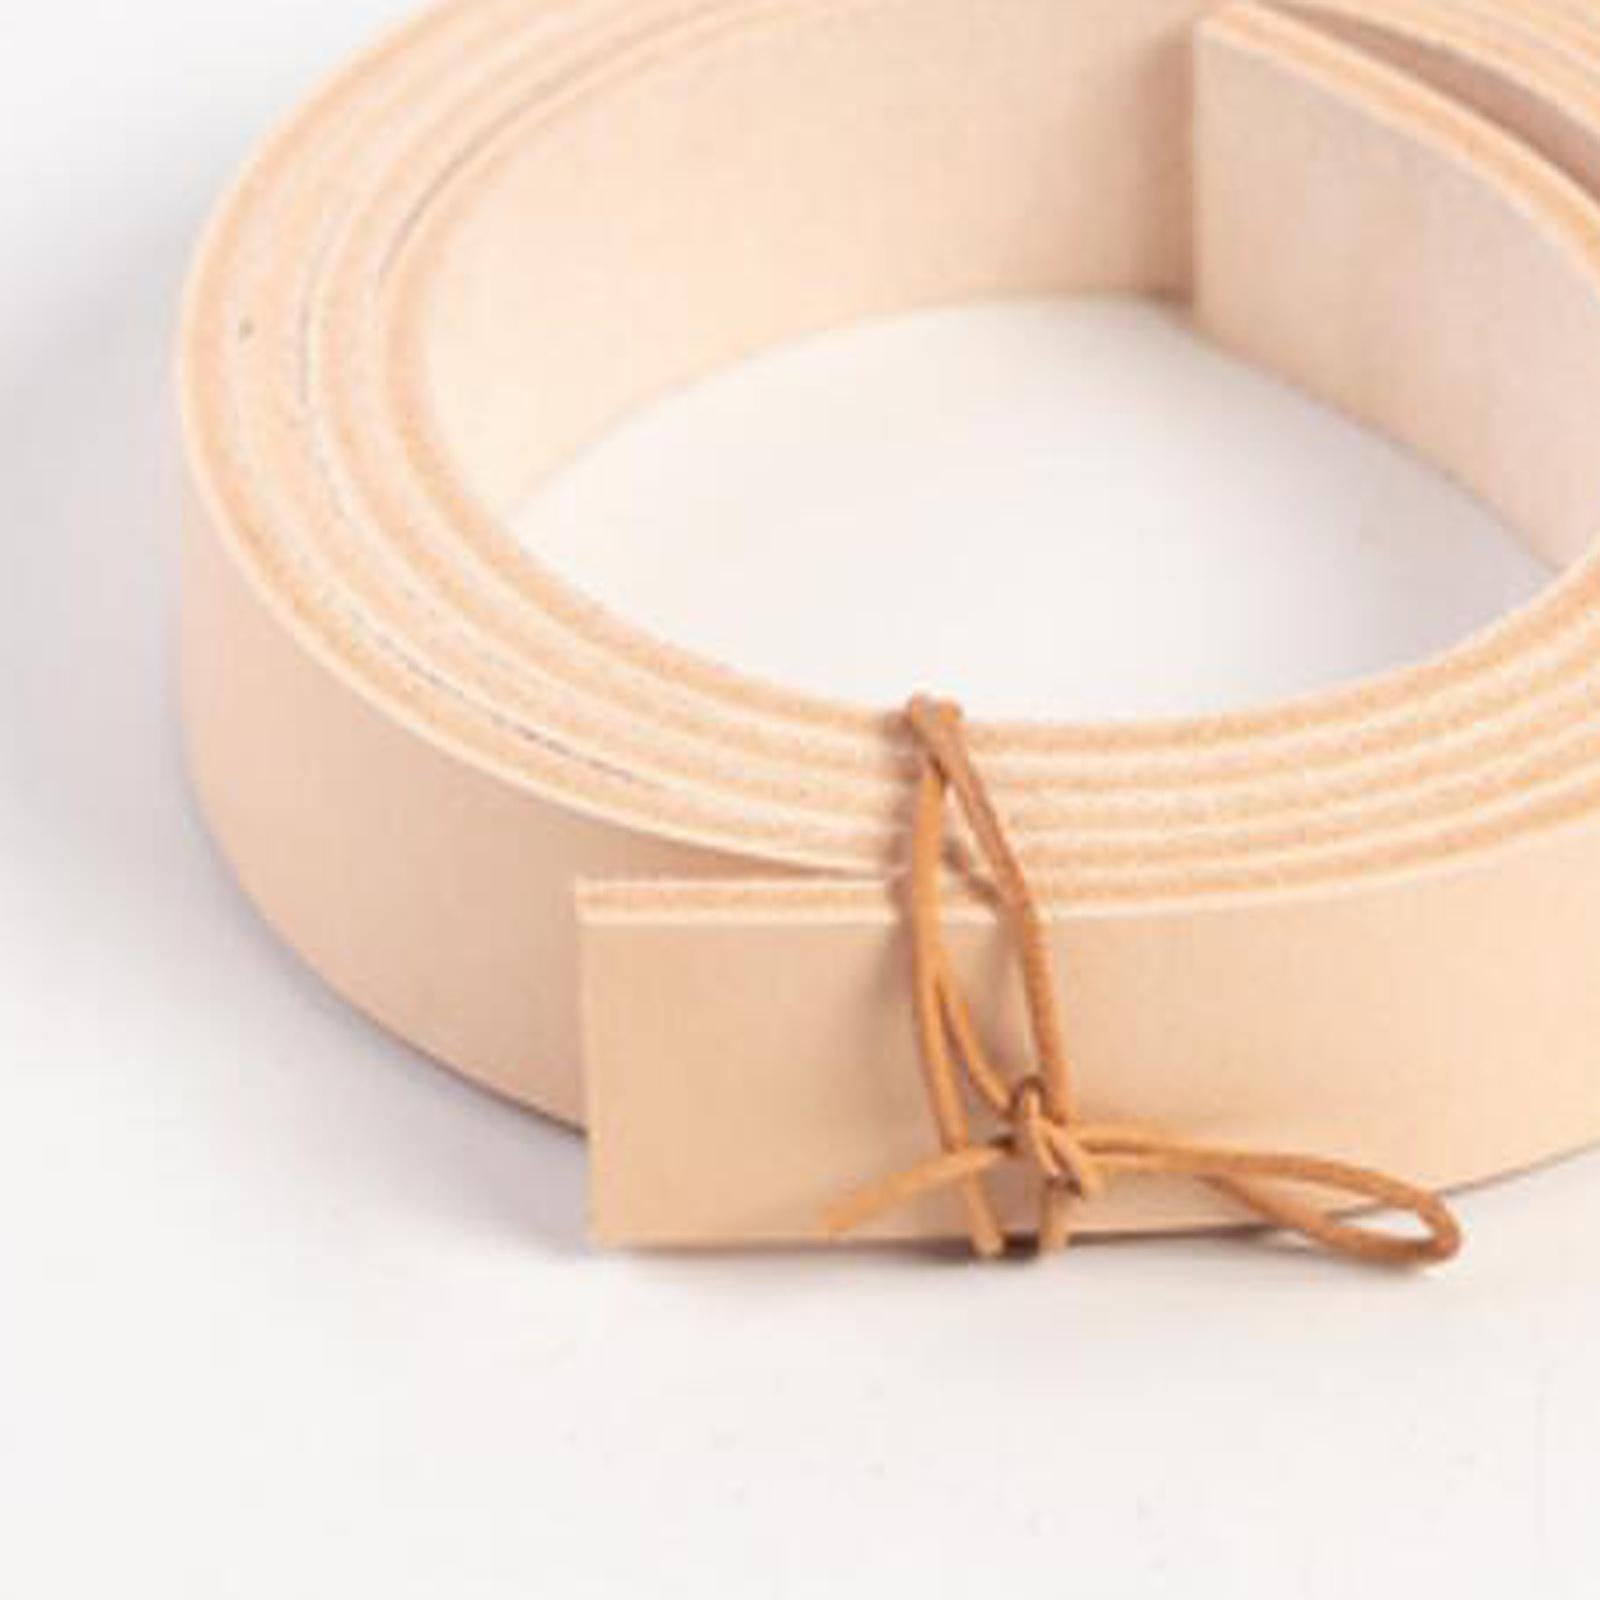 PU Leather Strips Pets Collars 2x80cm Straps Crafting Sewing Keychain Belt Natural color